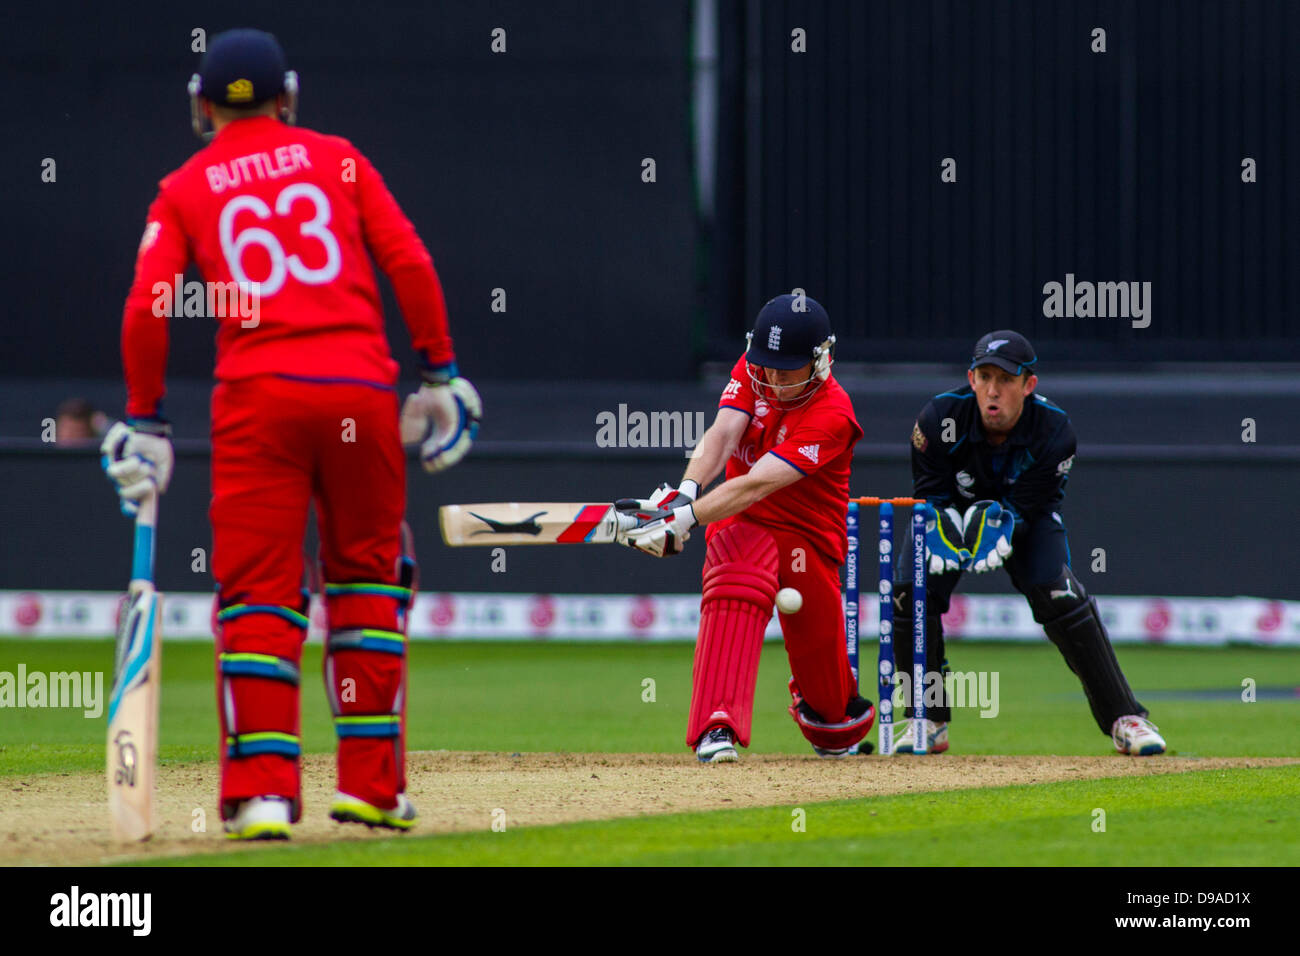 Cardiff, Wales. 16th June, 2013. England's Eoin Morgan is dismissed LBW off the bowling of Daniel Vettori (not pictured) during the ICC Champions Trophy international cricket match between England and New Zealand at Cardiff Wales Stadium on June 16, 2013 in Cardiff, Wales. (Photo by Mitchell Gunn/ESPA/Alamy Live News) Stock Photo